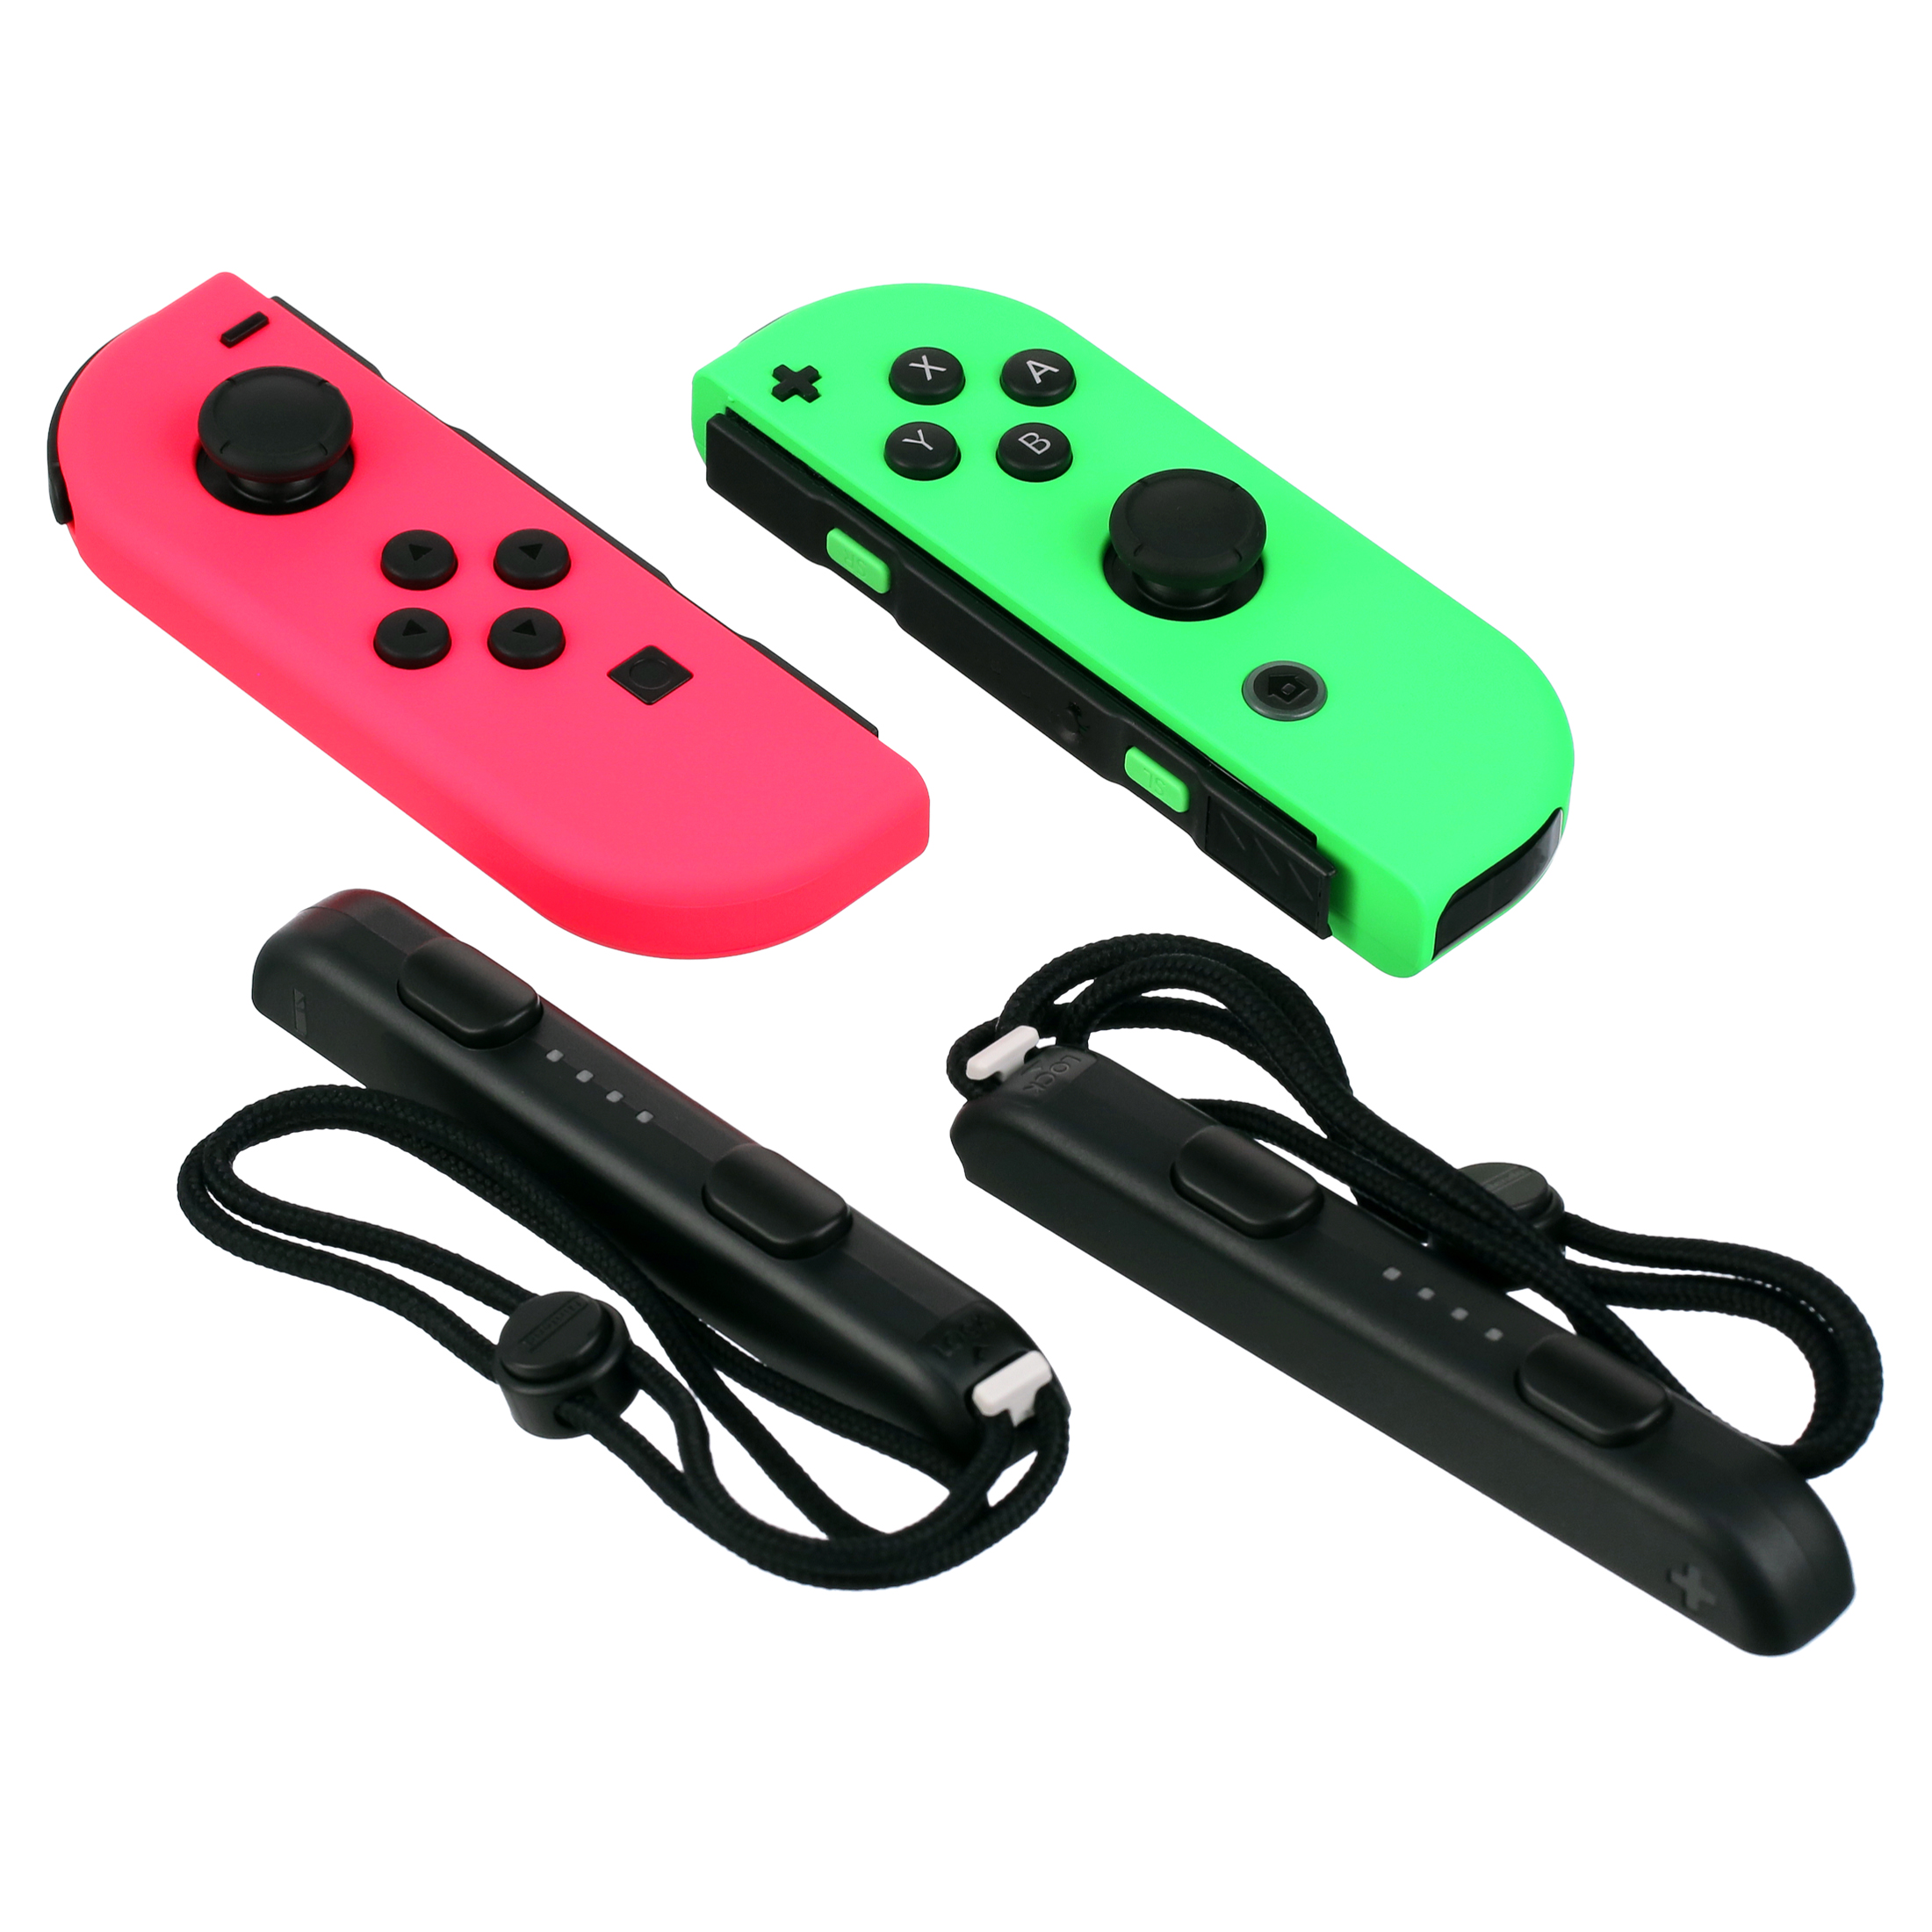 Nintendo Switch Joy-Con Pair, Neon Pink and Neon Green - image 2 of 6